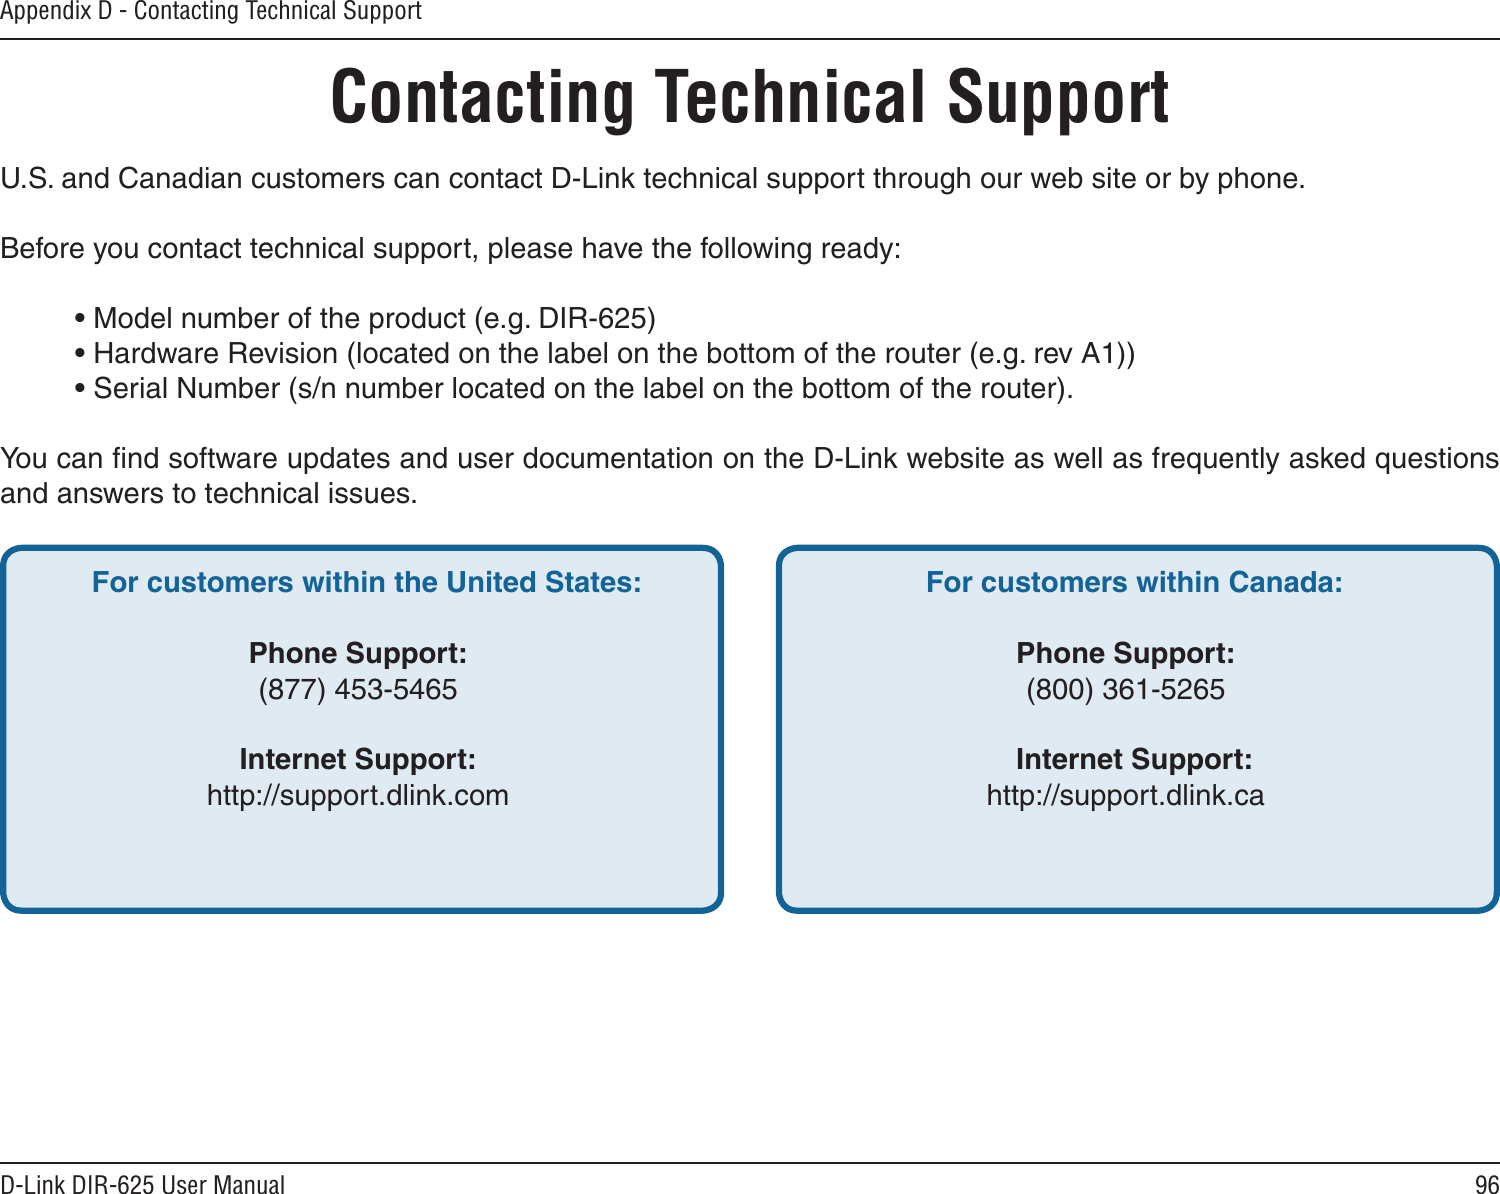 96D-Link DIR-625 User ManualAppendix D - Contacting Technical SupportContacting Technical SupportU.S. and Canadian customers can contact D-Link technical support through our web site or by phone.Before you contact technical support, please have the following ready:  • Model number of the product (e.g. DIR-625)  • Hardware Revision (located on the label on the bottom of the router (e.g. rev A1))  • Serial Number (s/n number located on the label on the bottom of the router). You can ﬁnd software updates and user documentation on the D-Link website as well as frequently asked questions and answers to technical issues.For customers within the United States: Phone Support:(877) 453-5465Internet Support:http://support.dlink.com For customers within Canada: Phone Support:(800) 361-5265 Internet Support:http://support.dlink.ca